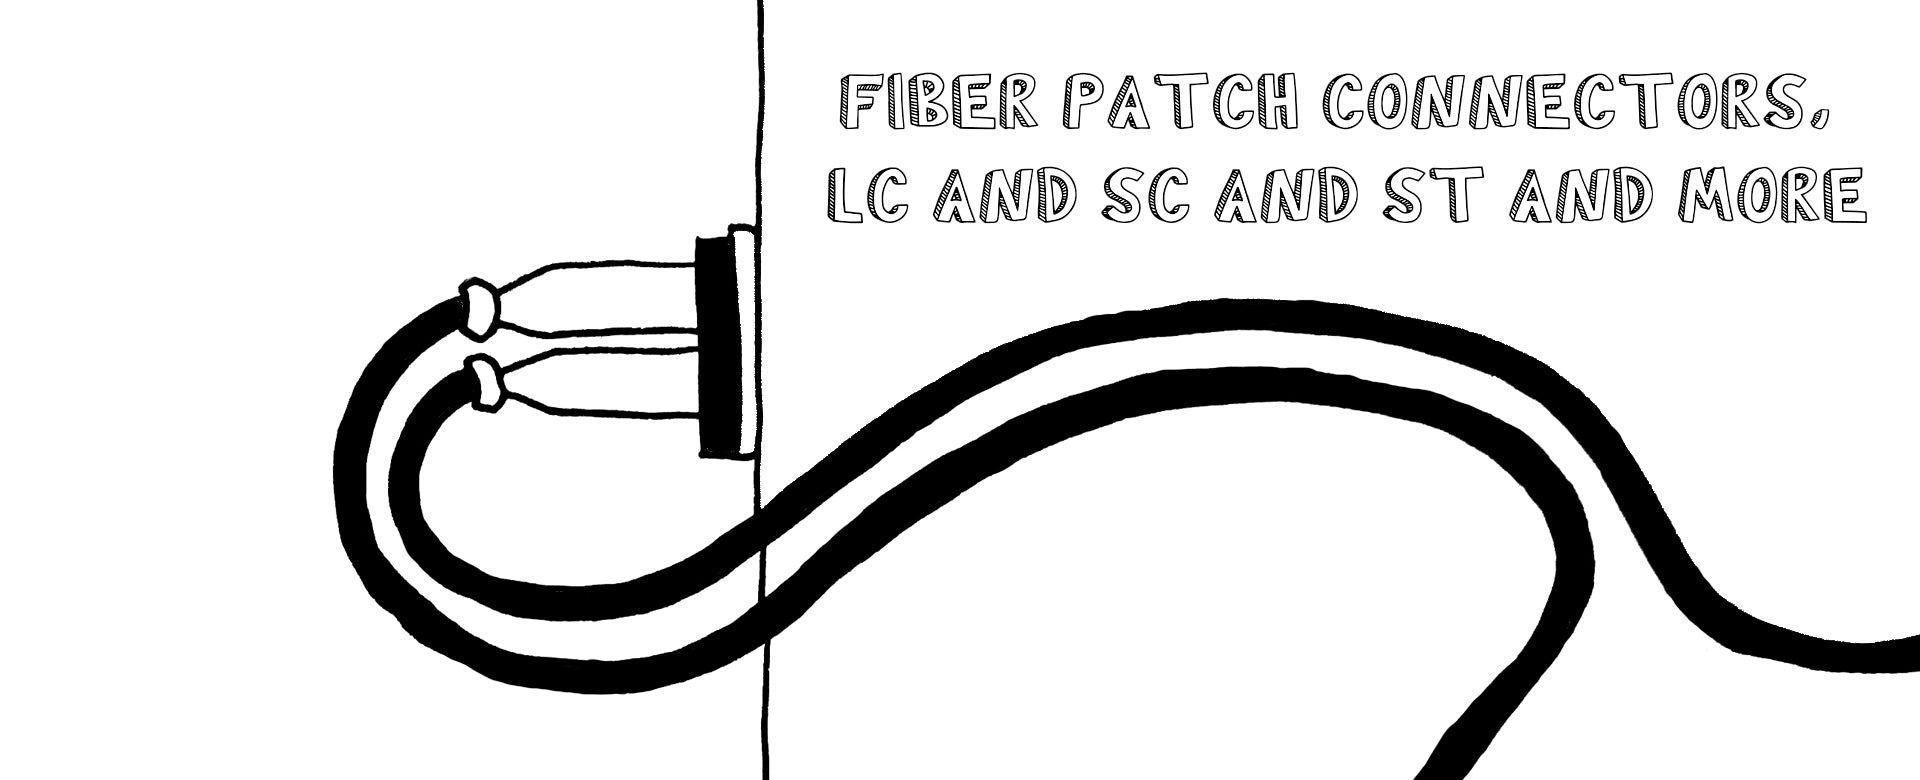 Fiber Patch Connectors, LC and SC and ST and More